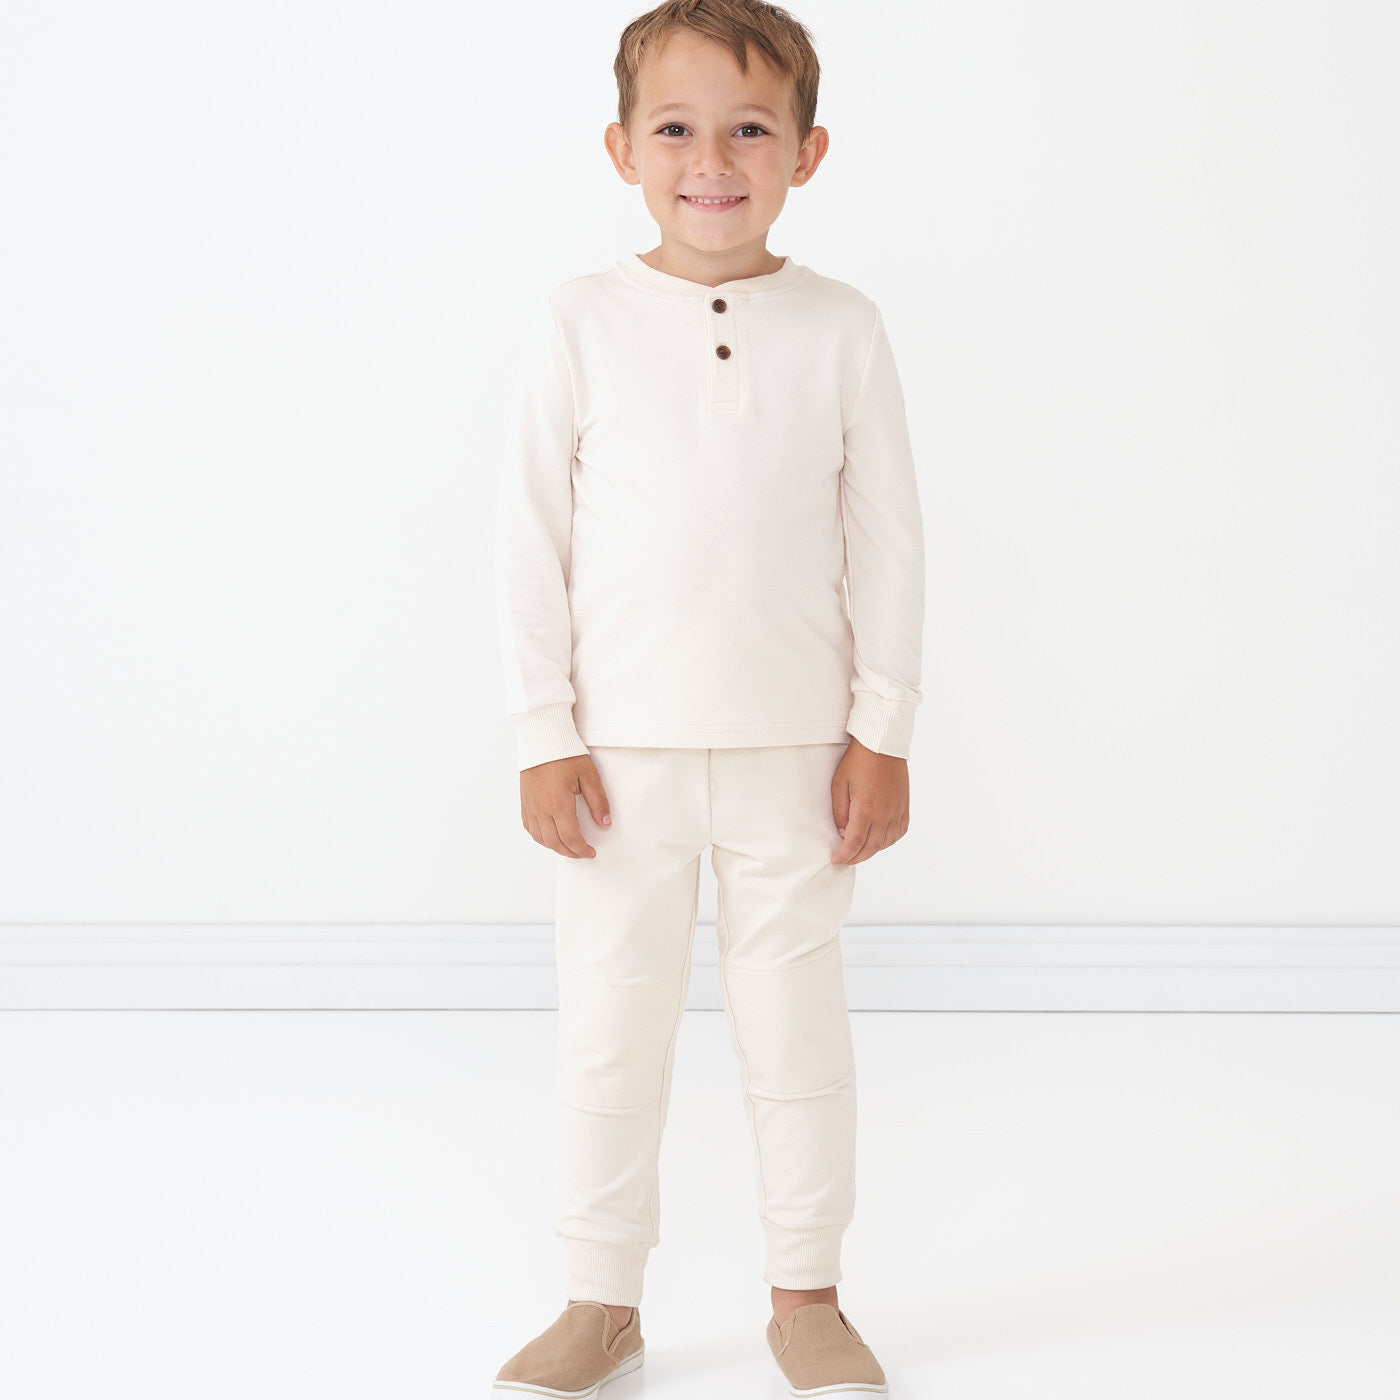 Child wearing a Cream henley tee and matching joggers